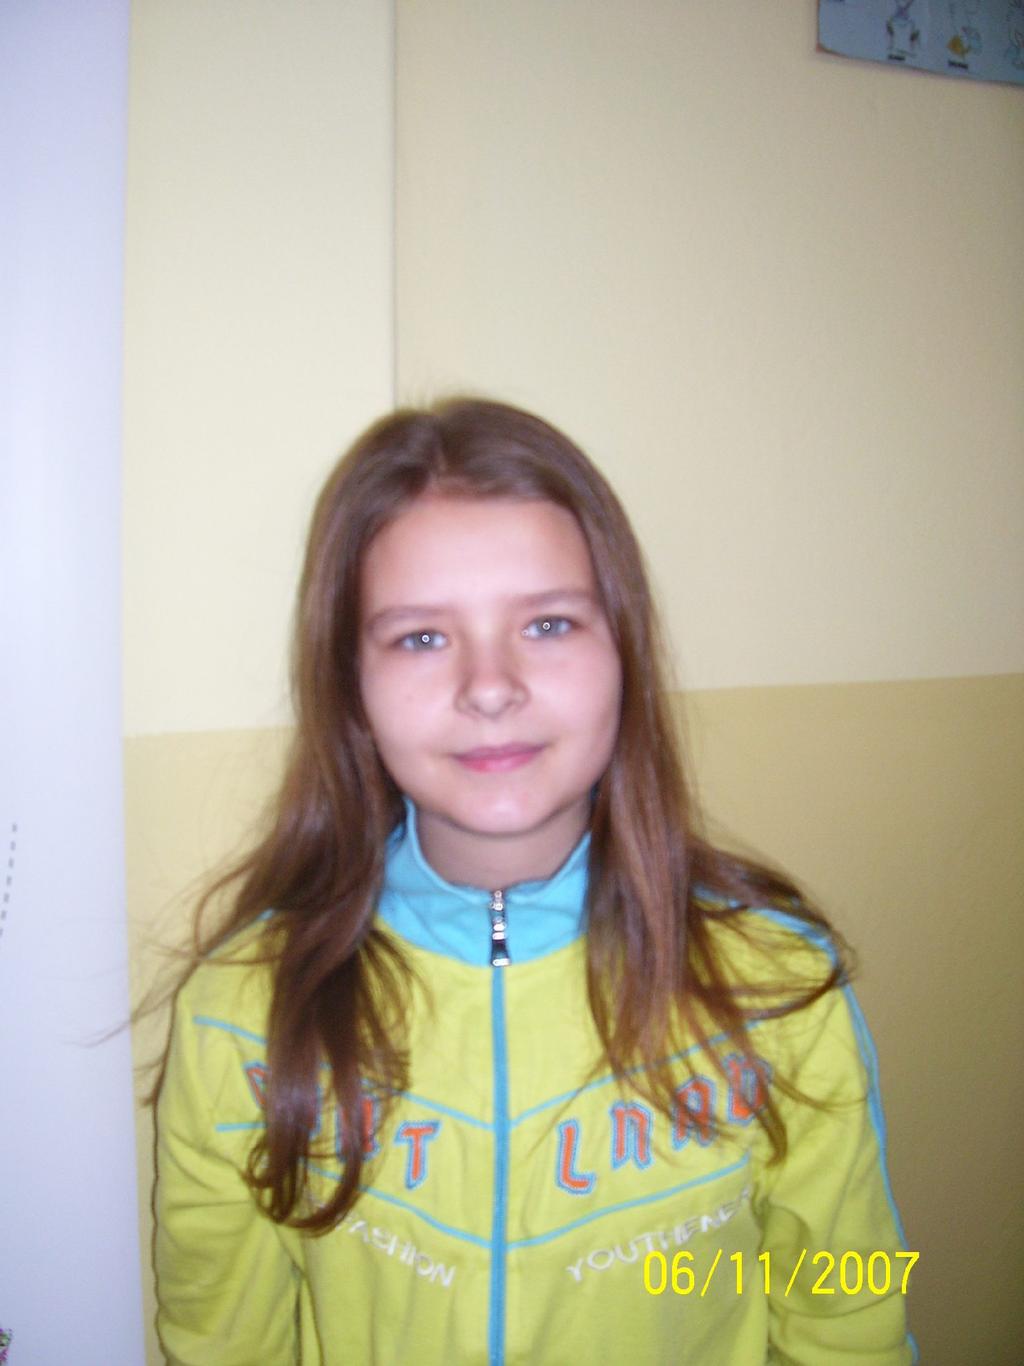 Hi! My name is Agnieszka, my surname is Bankiel. I am 12 years old. I am in class 6a. I like animals, playing football and swimming. I have got a dog.